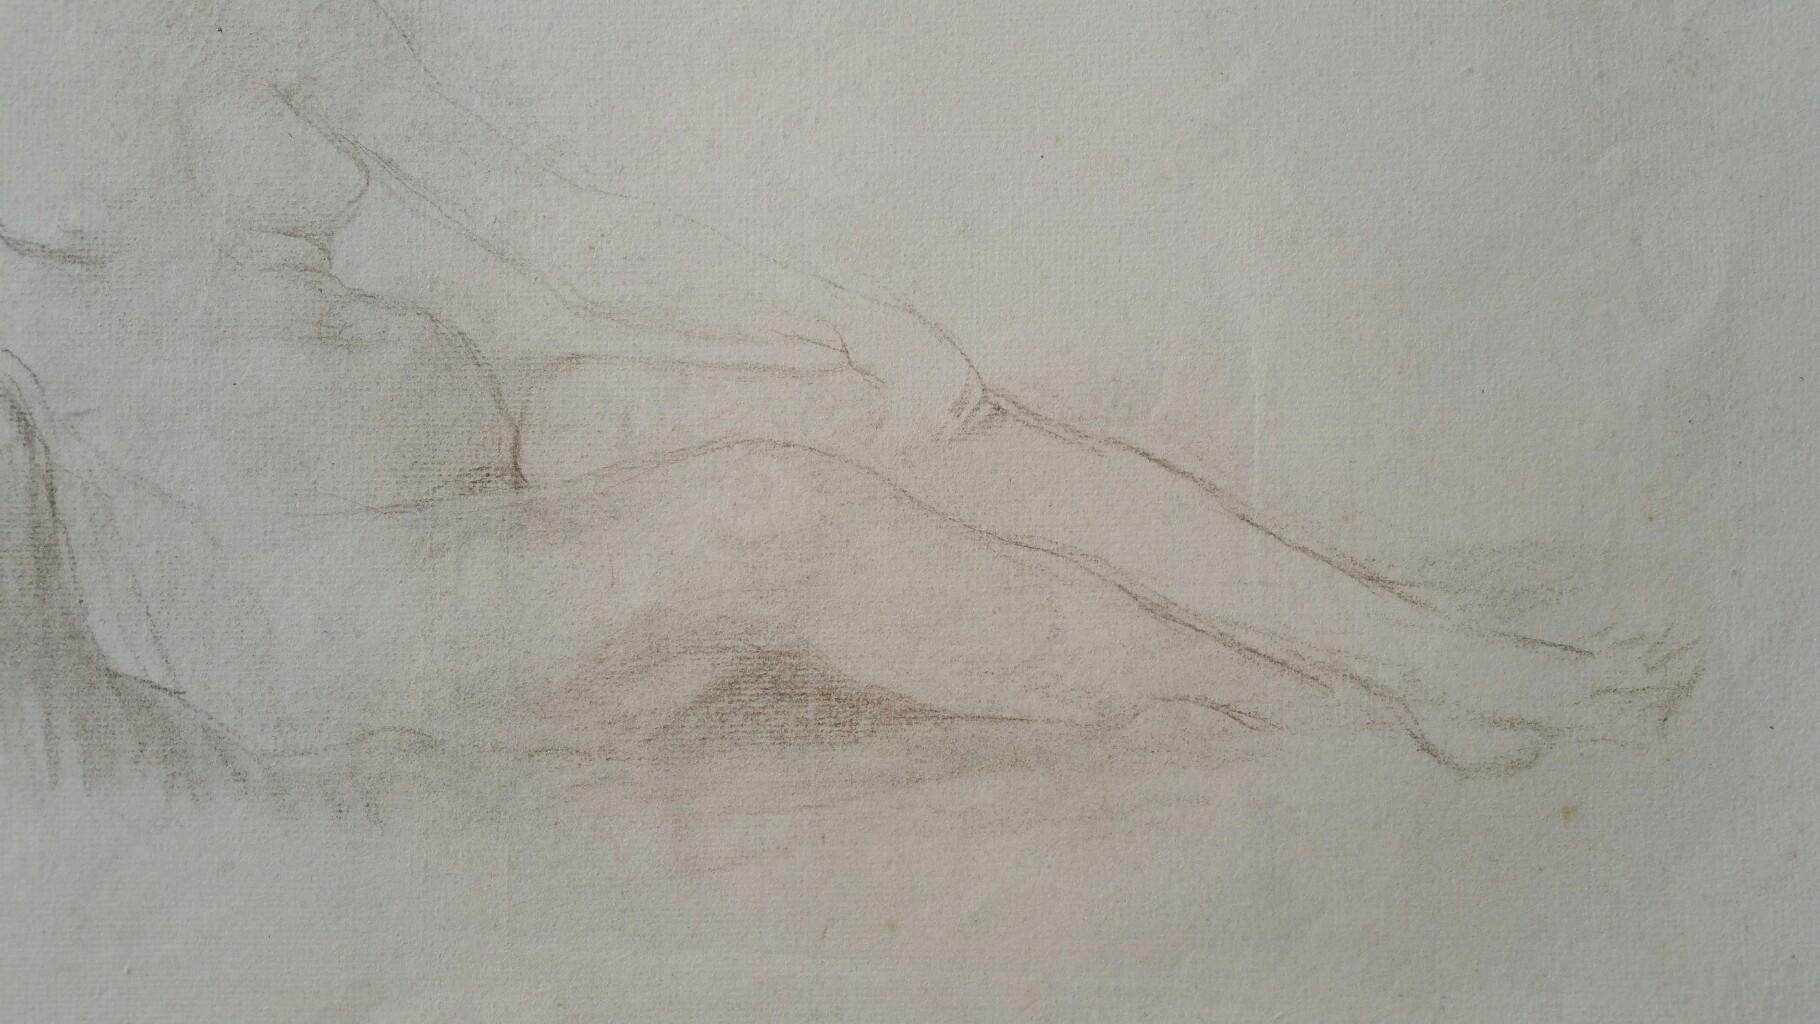 English Graphite Sketch of a Female Nude, Reclining (double sided sheet, another similar image verso)
by Henry George Moon (British 1857-1905)
on off white artists paper, unframed
measurements: sheet 15 x 21 inches 

provenance: from the artists